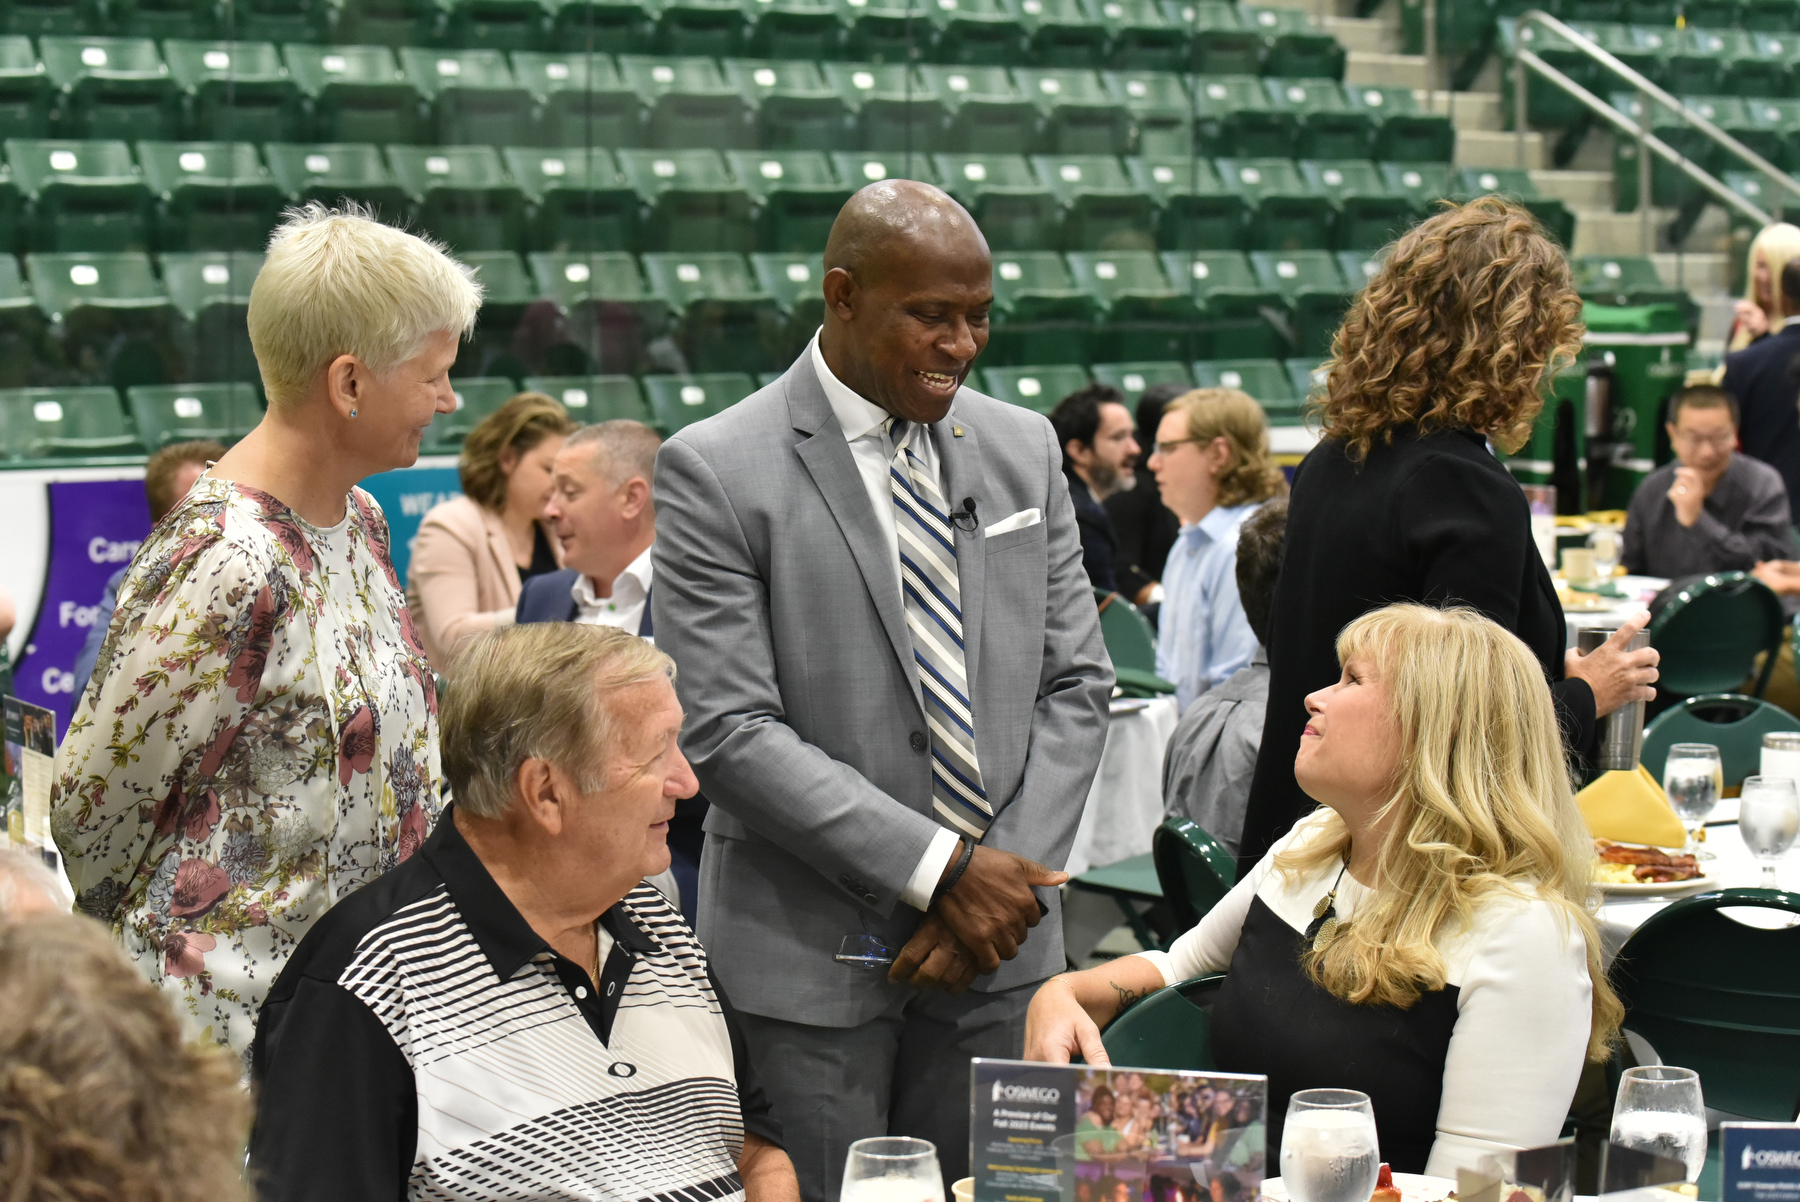 President Peter O. Nwosu (standing center) and Mary C. Toale, who had served as the university’s Officer in Charge and now is Deputy to the President for Strategy and Planning, talk during the Opening Breakfast Aug. 22 with Michele May of The Compass, one of the institution’s SUNY Chancellor's Award winners.